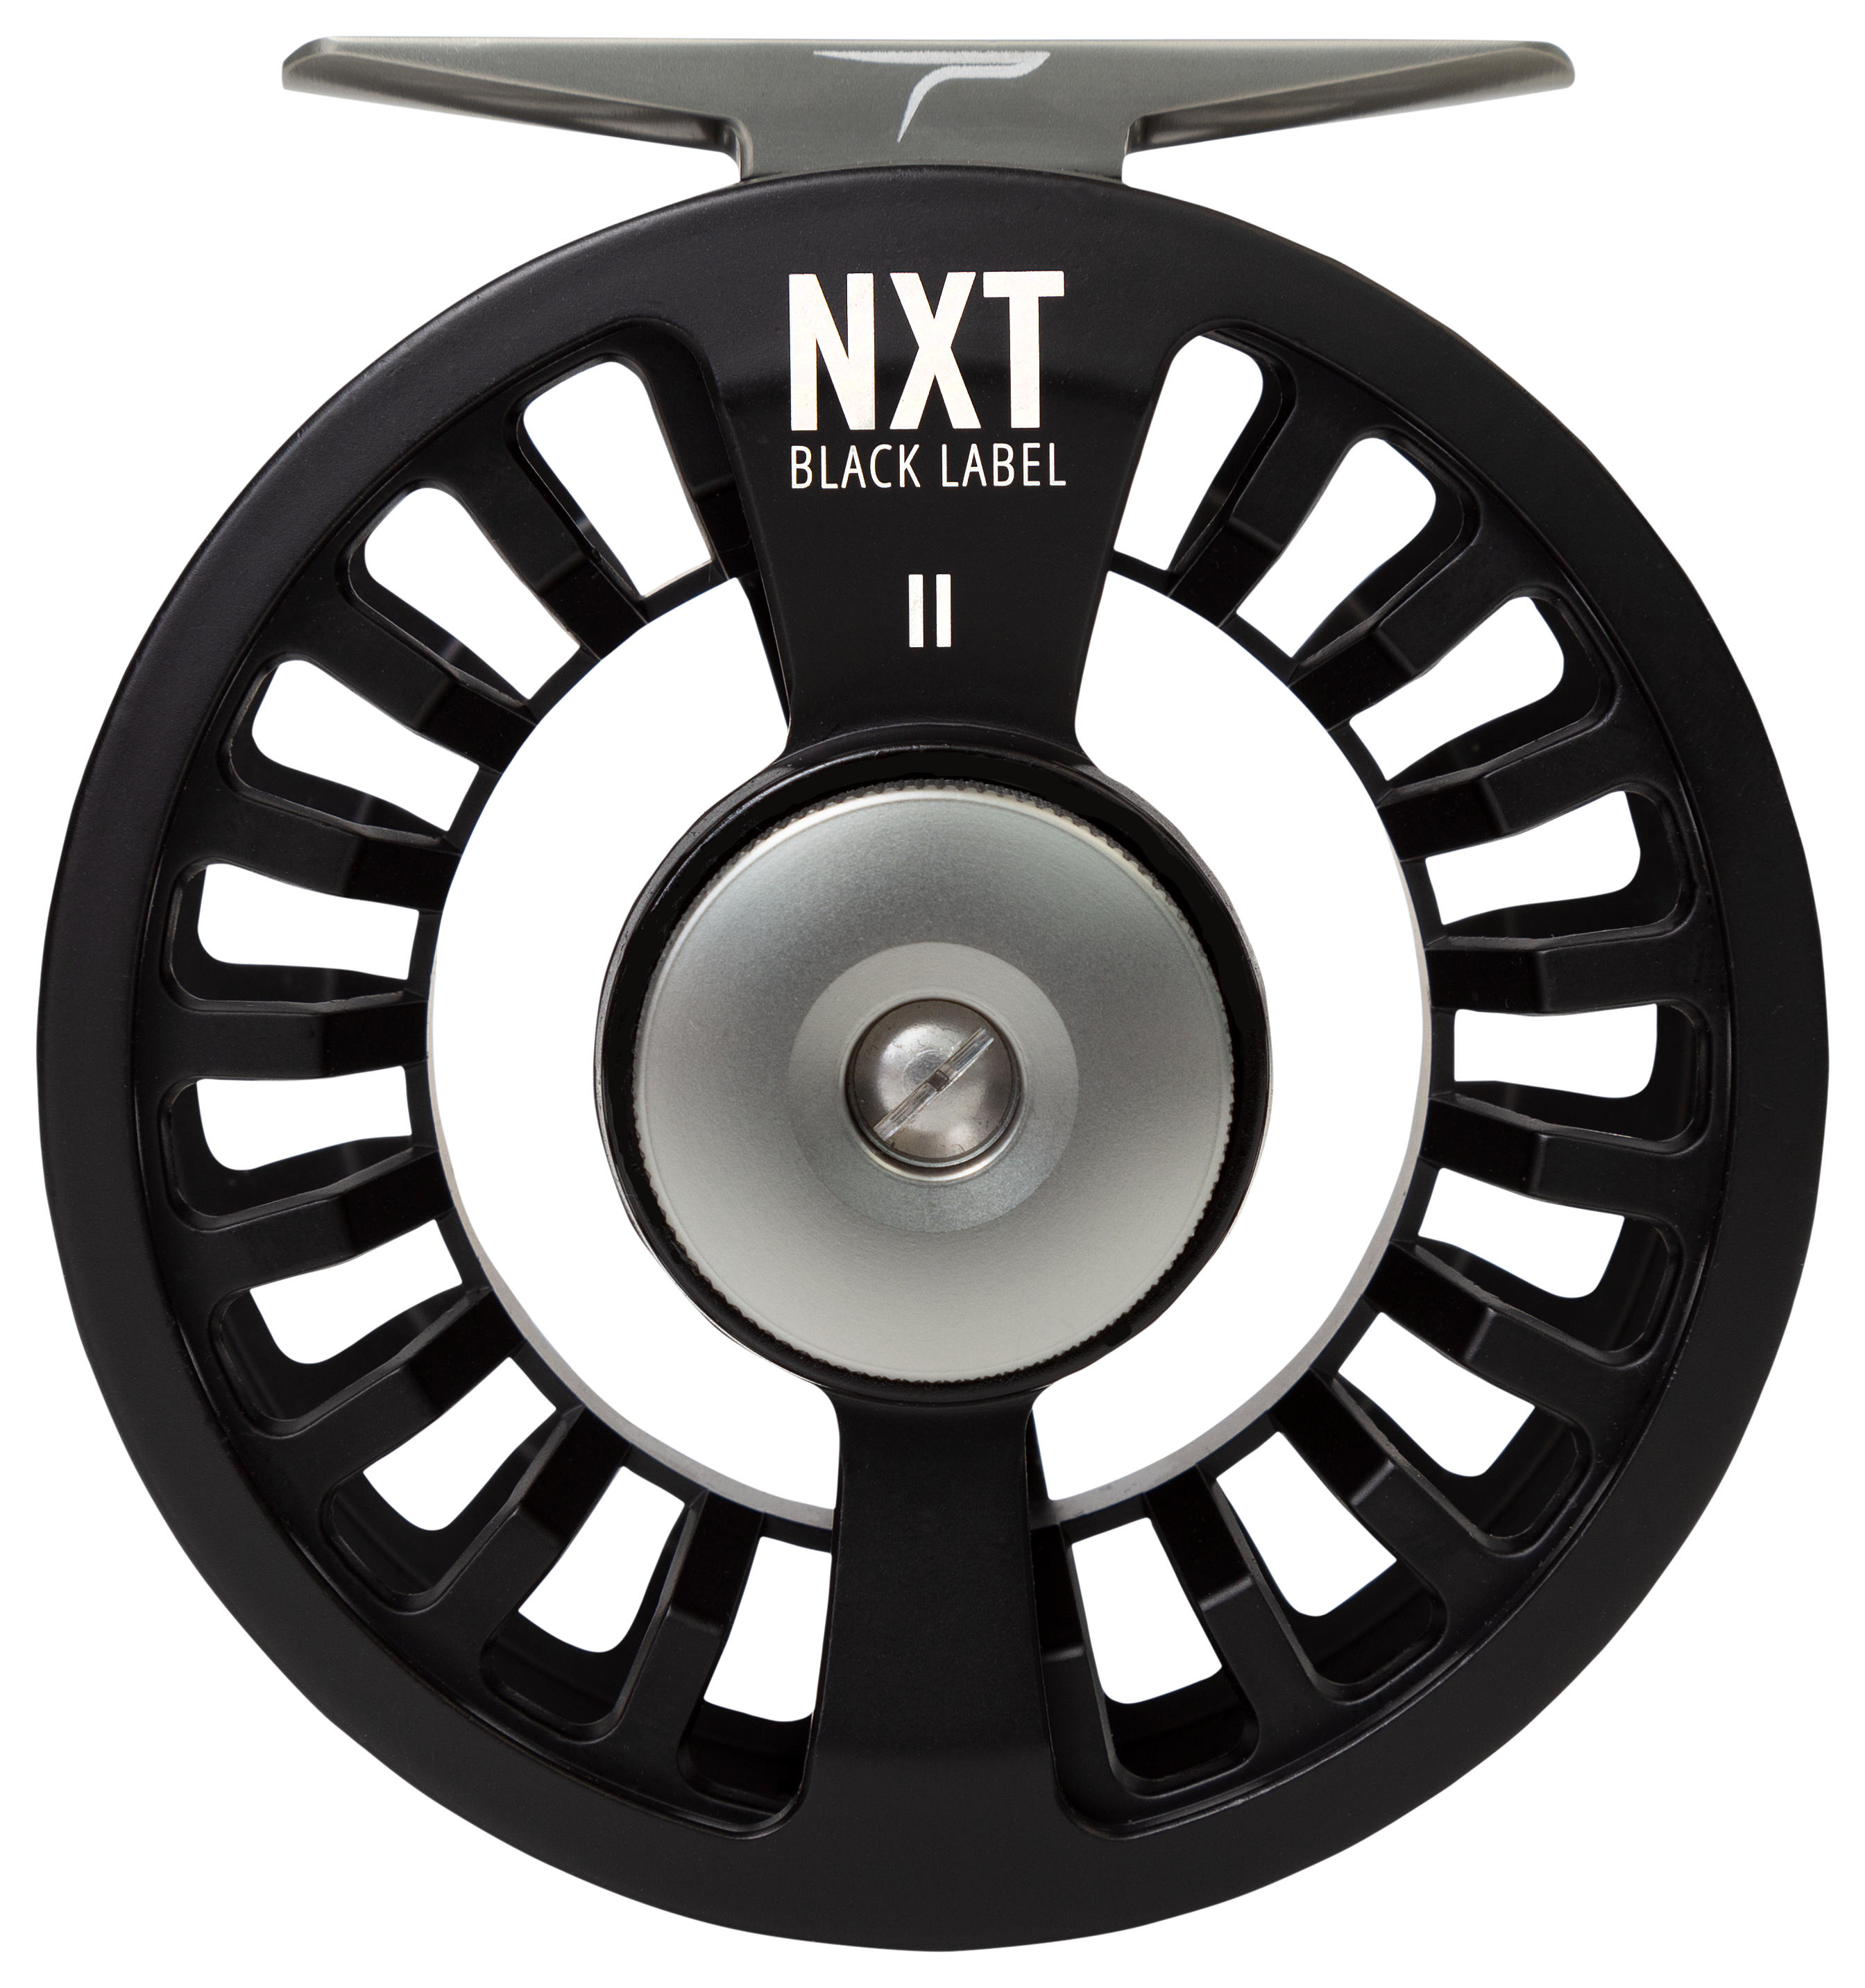 Temple Fork Outfitters NXT Black Label Fly Reel - TFR NXT BLK II